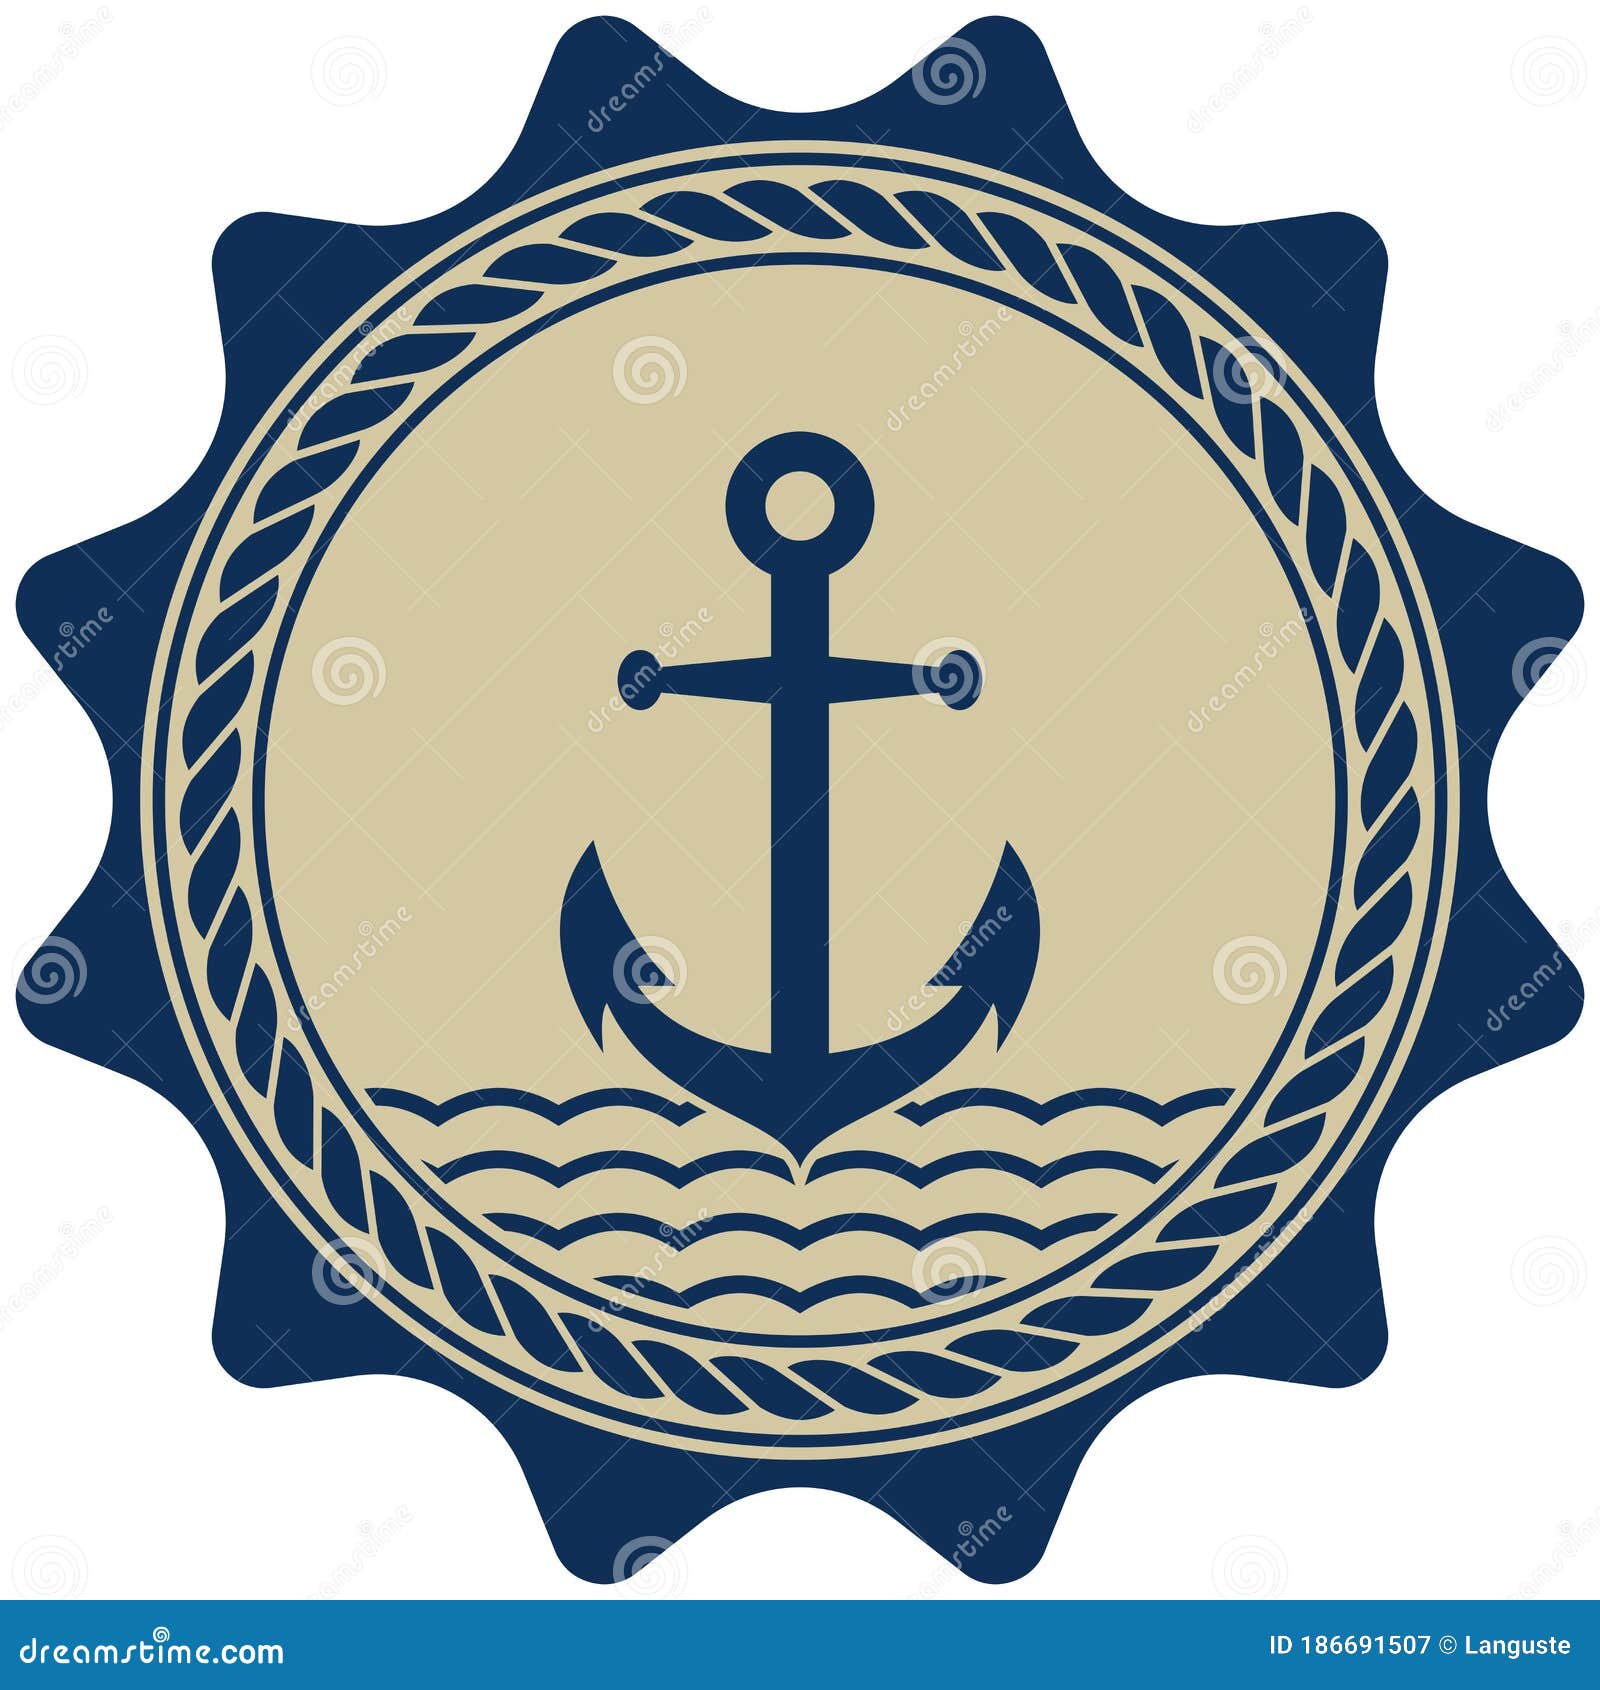 Nautical Anchor Symbol Vector with Nautical Rope in Marine Blue